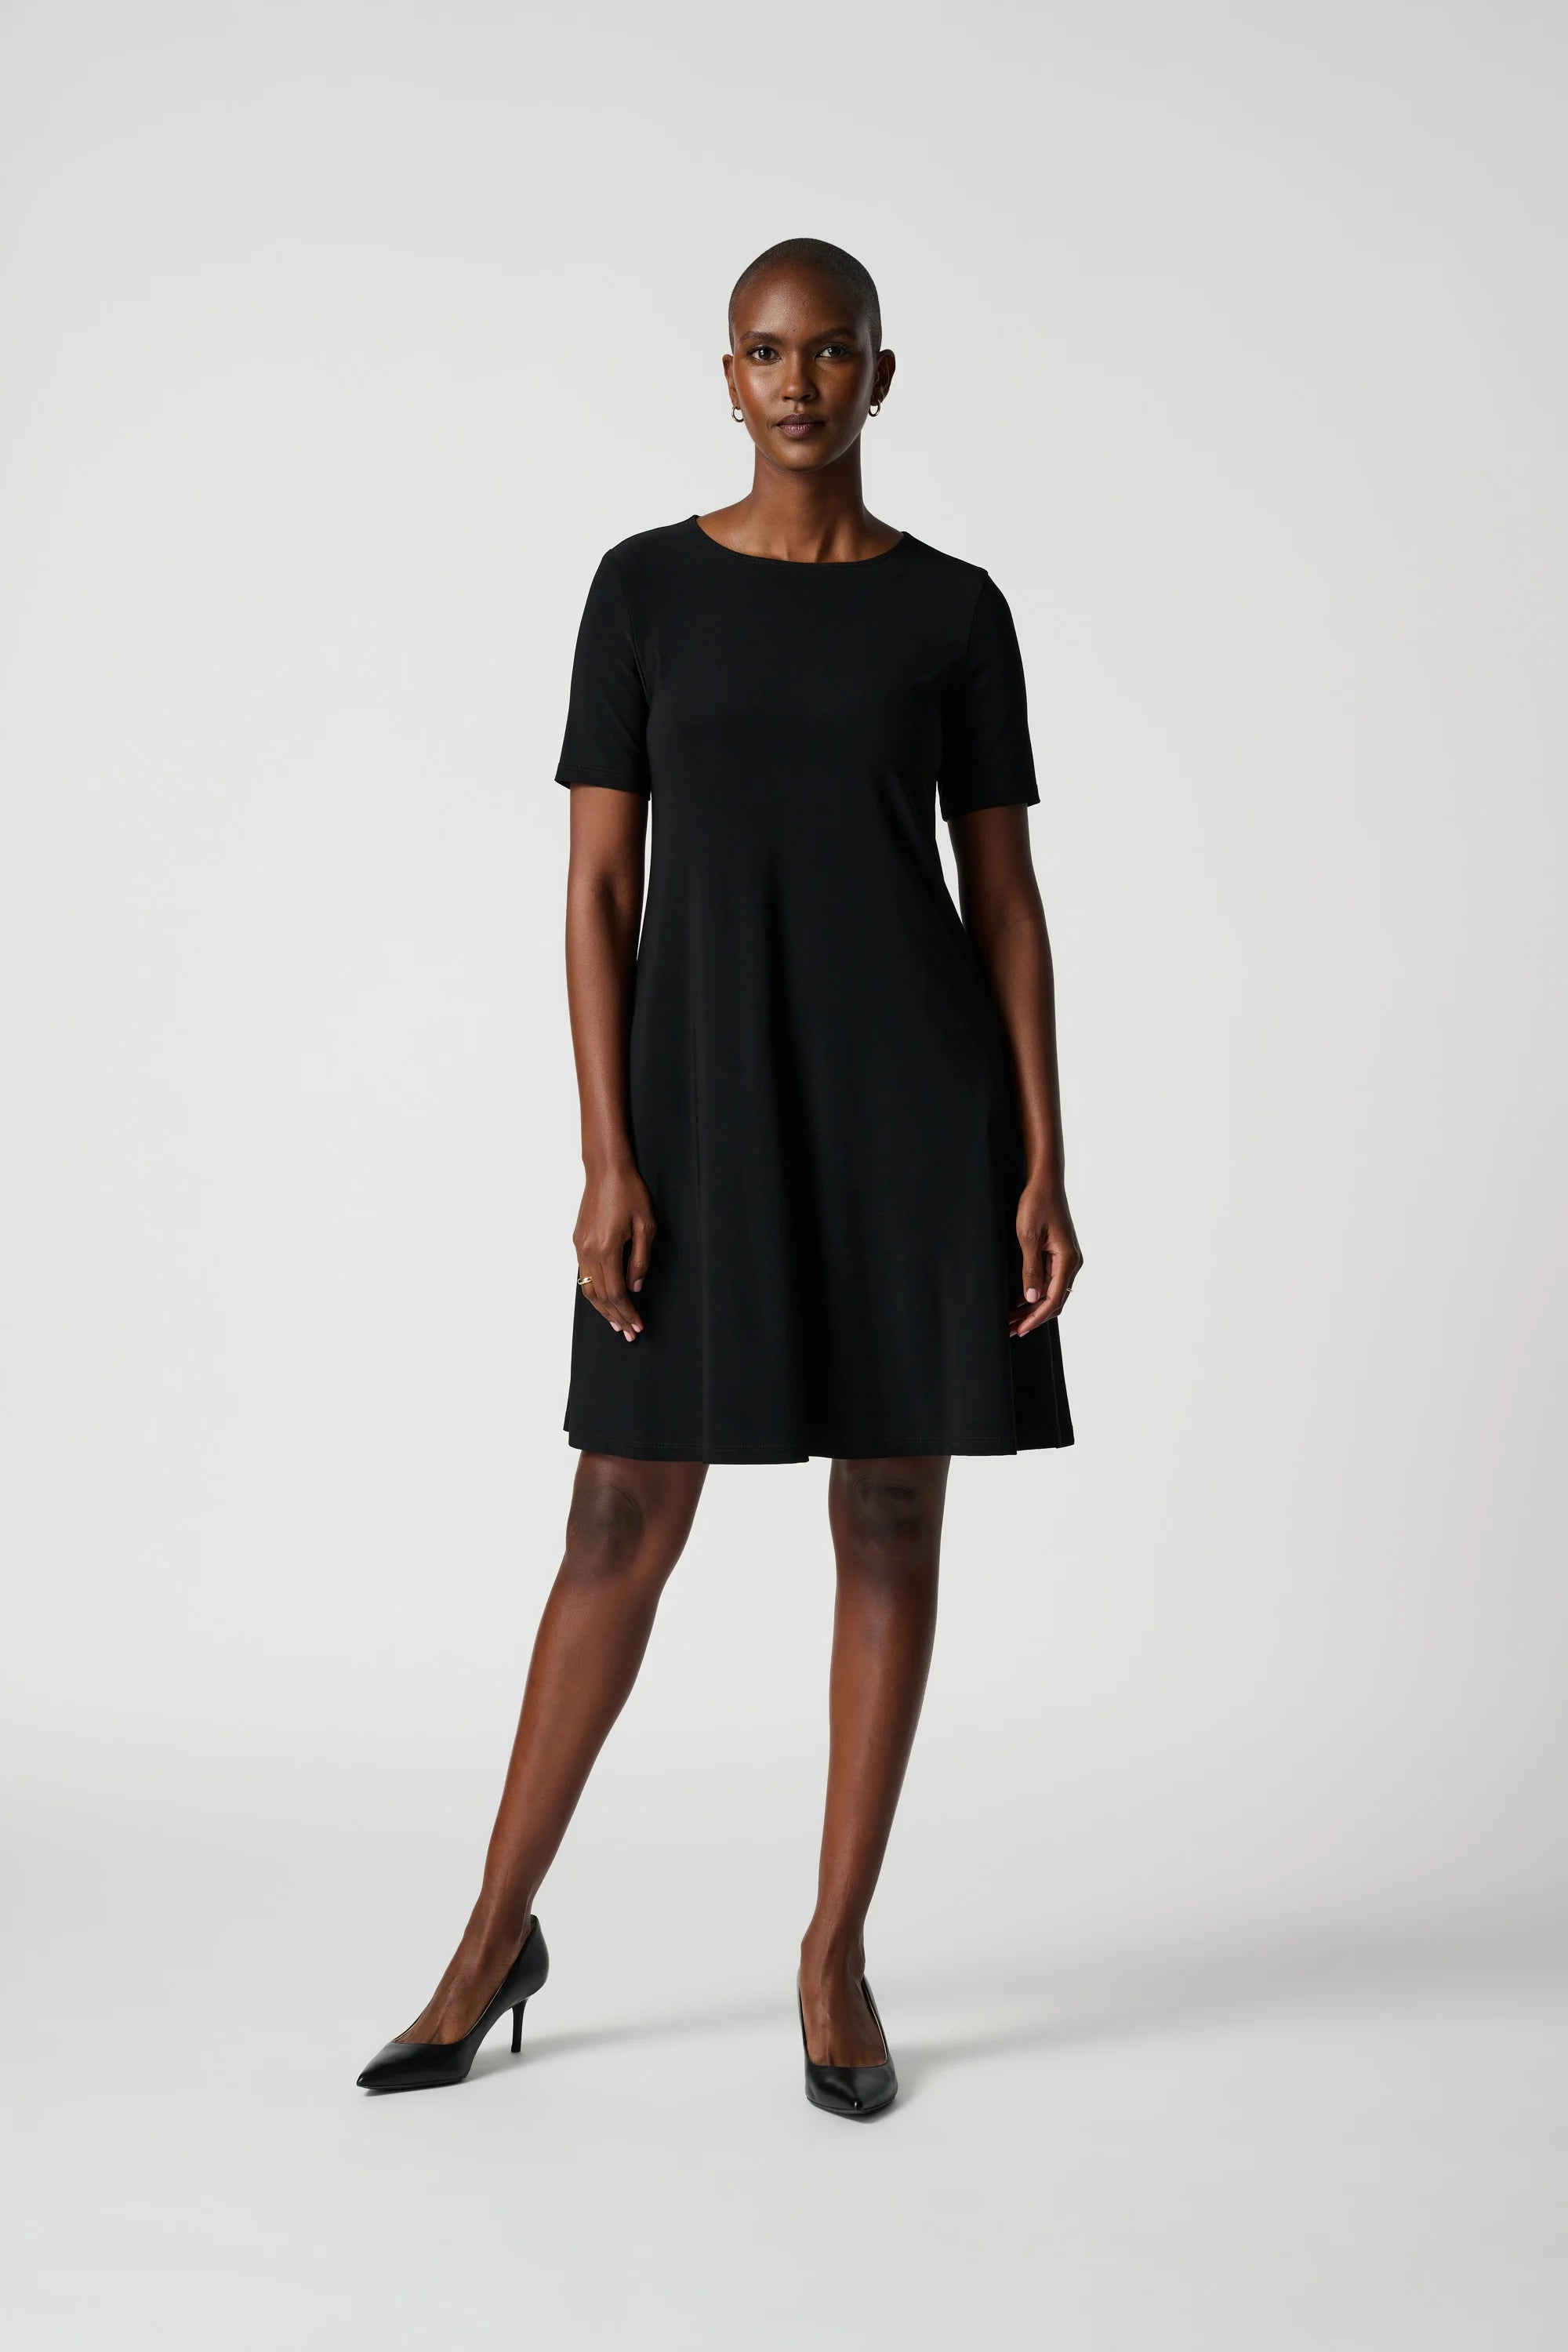 Joseph Ribkoff (202130NOS) Short Sleeve Classic A-Line Dress - Above the Knee Length in Black